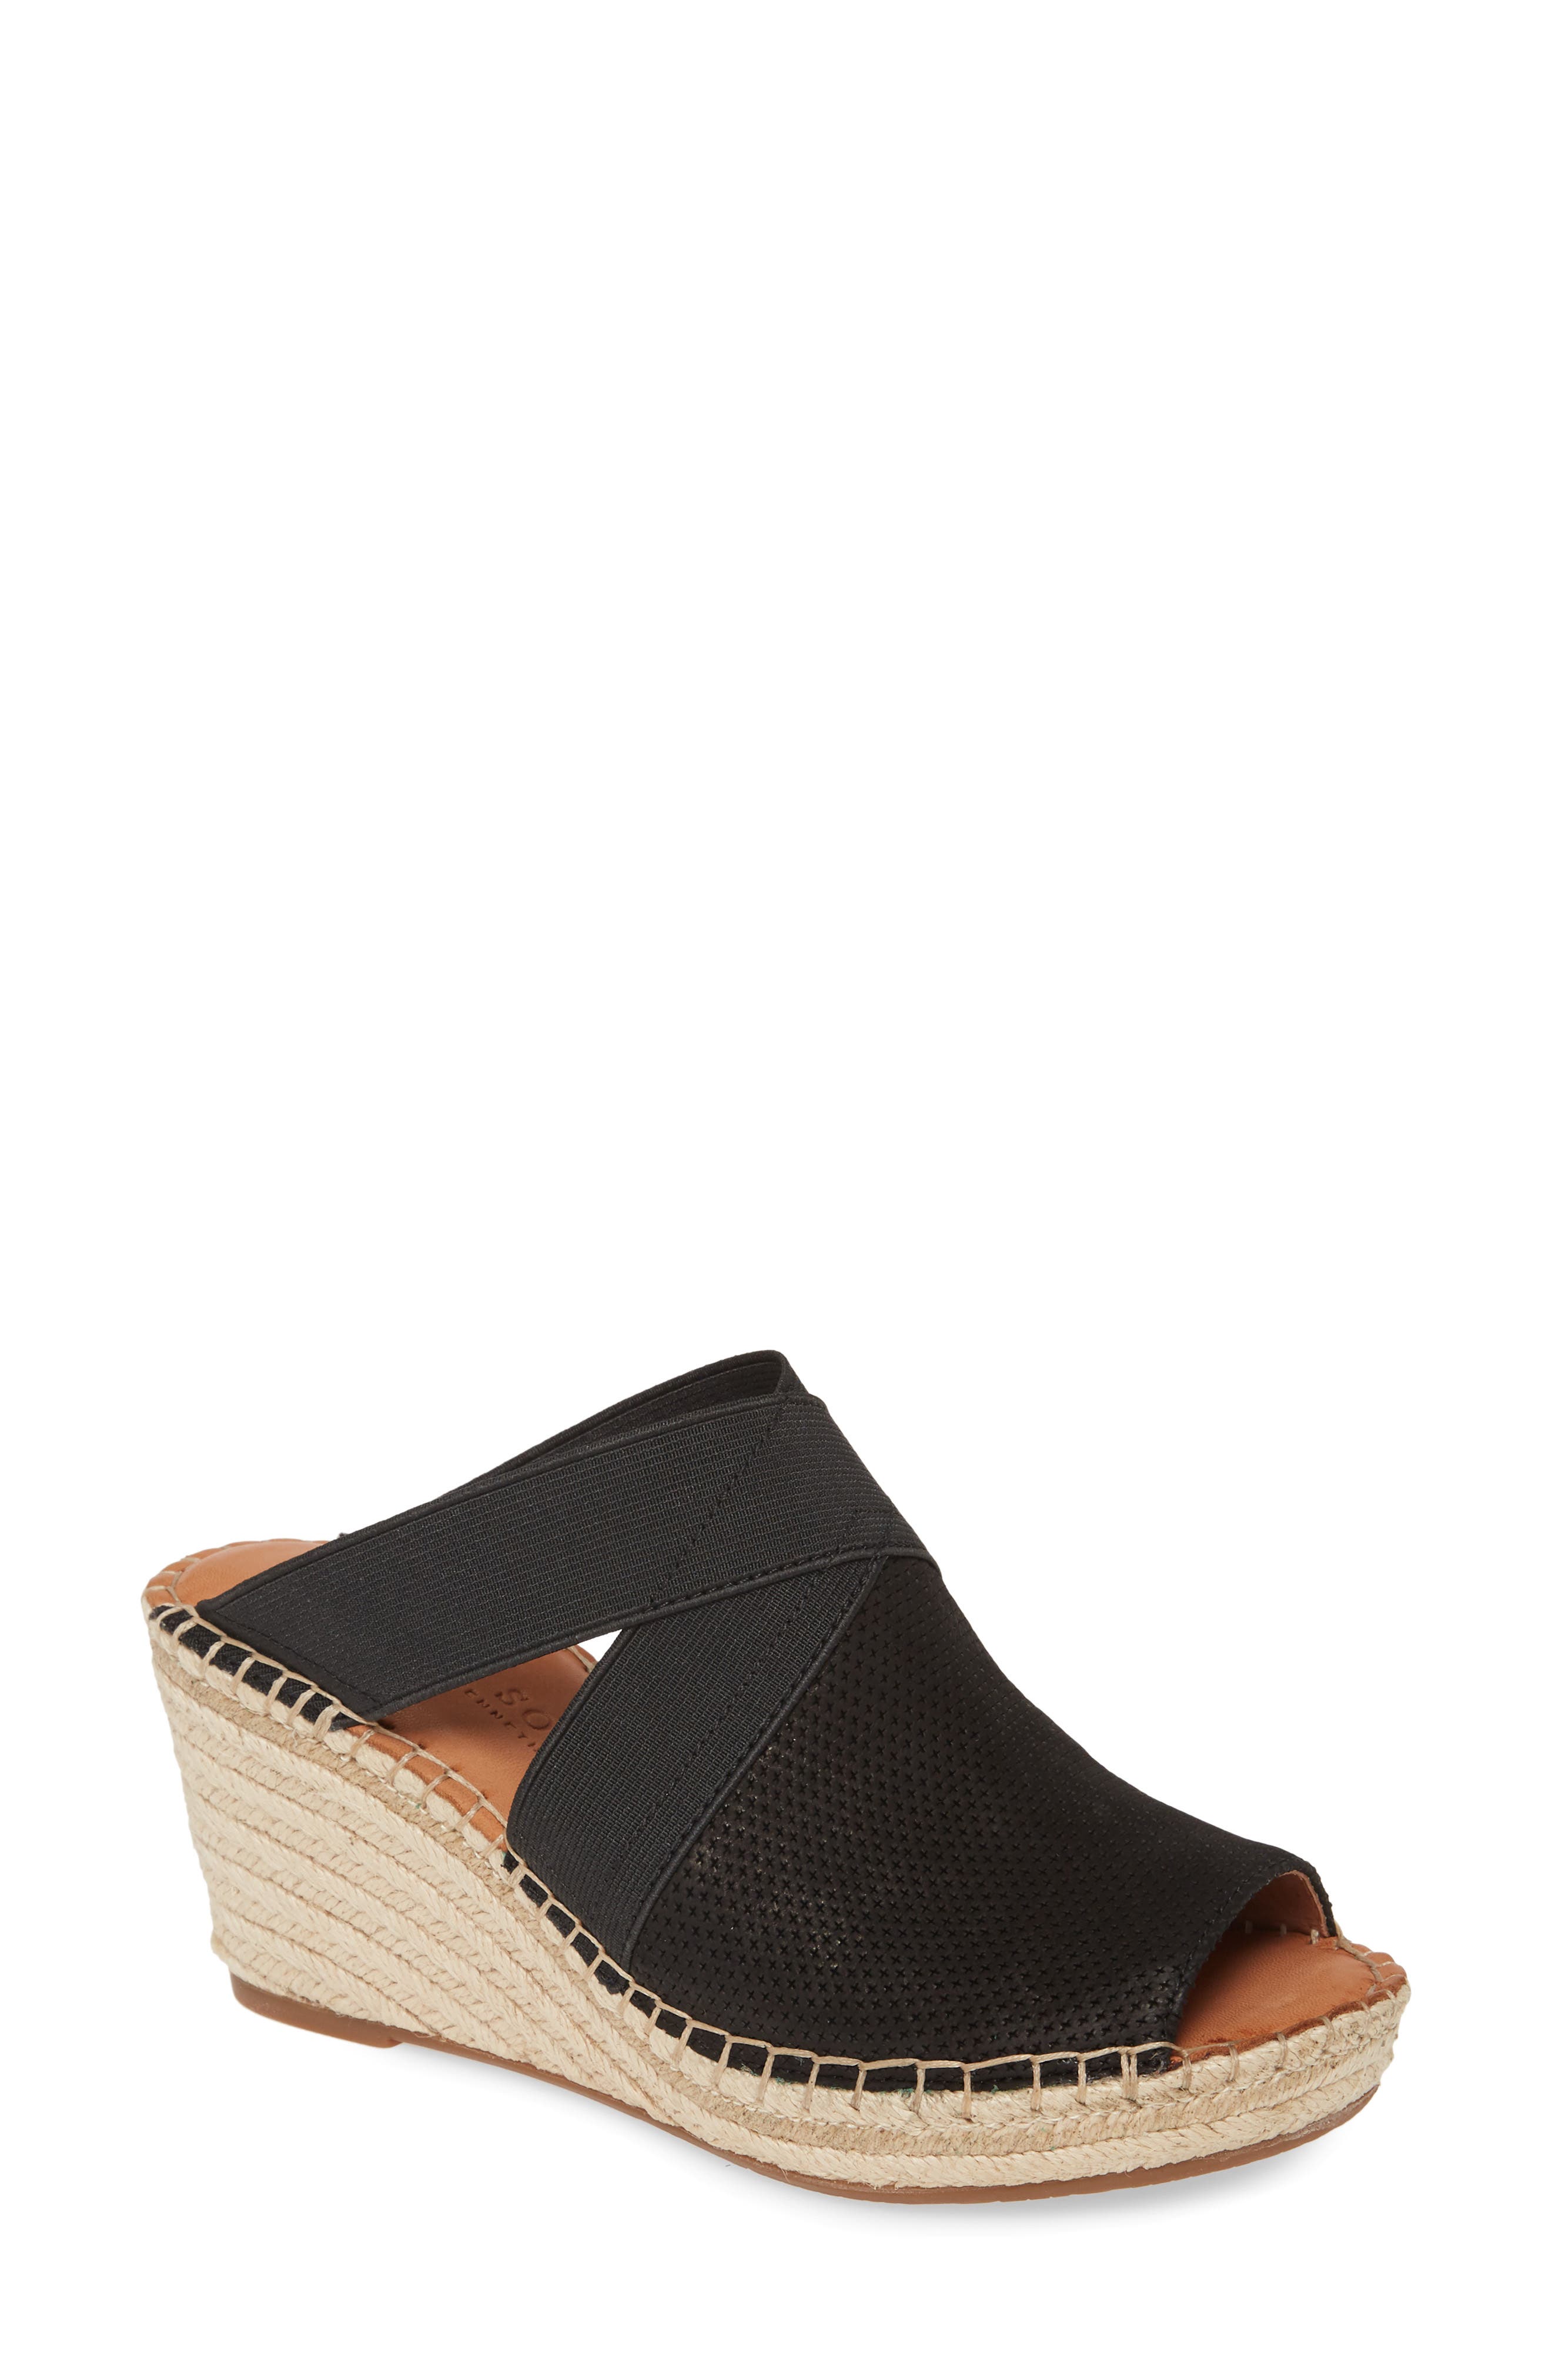 kenneth cole colleen espadrille wedge